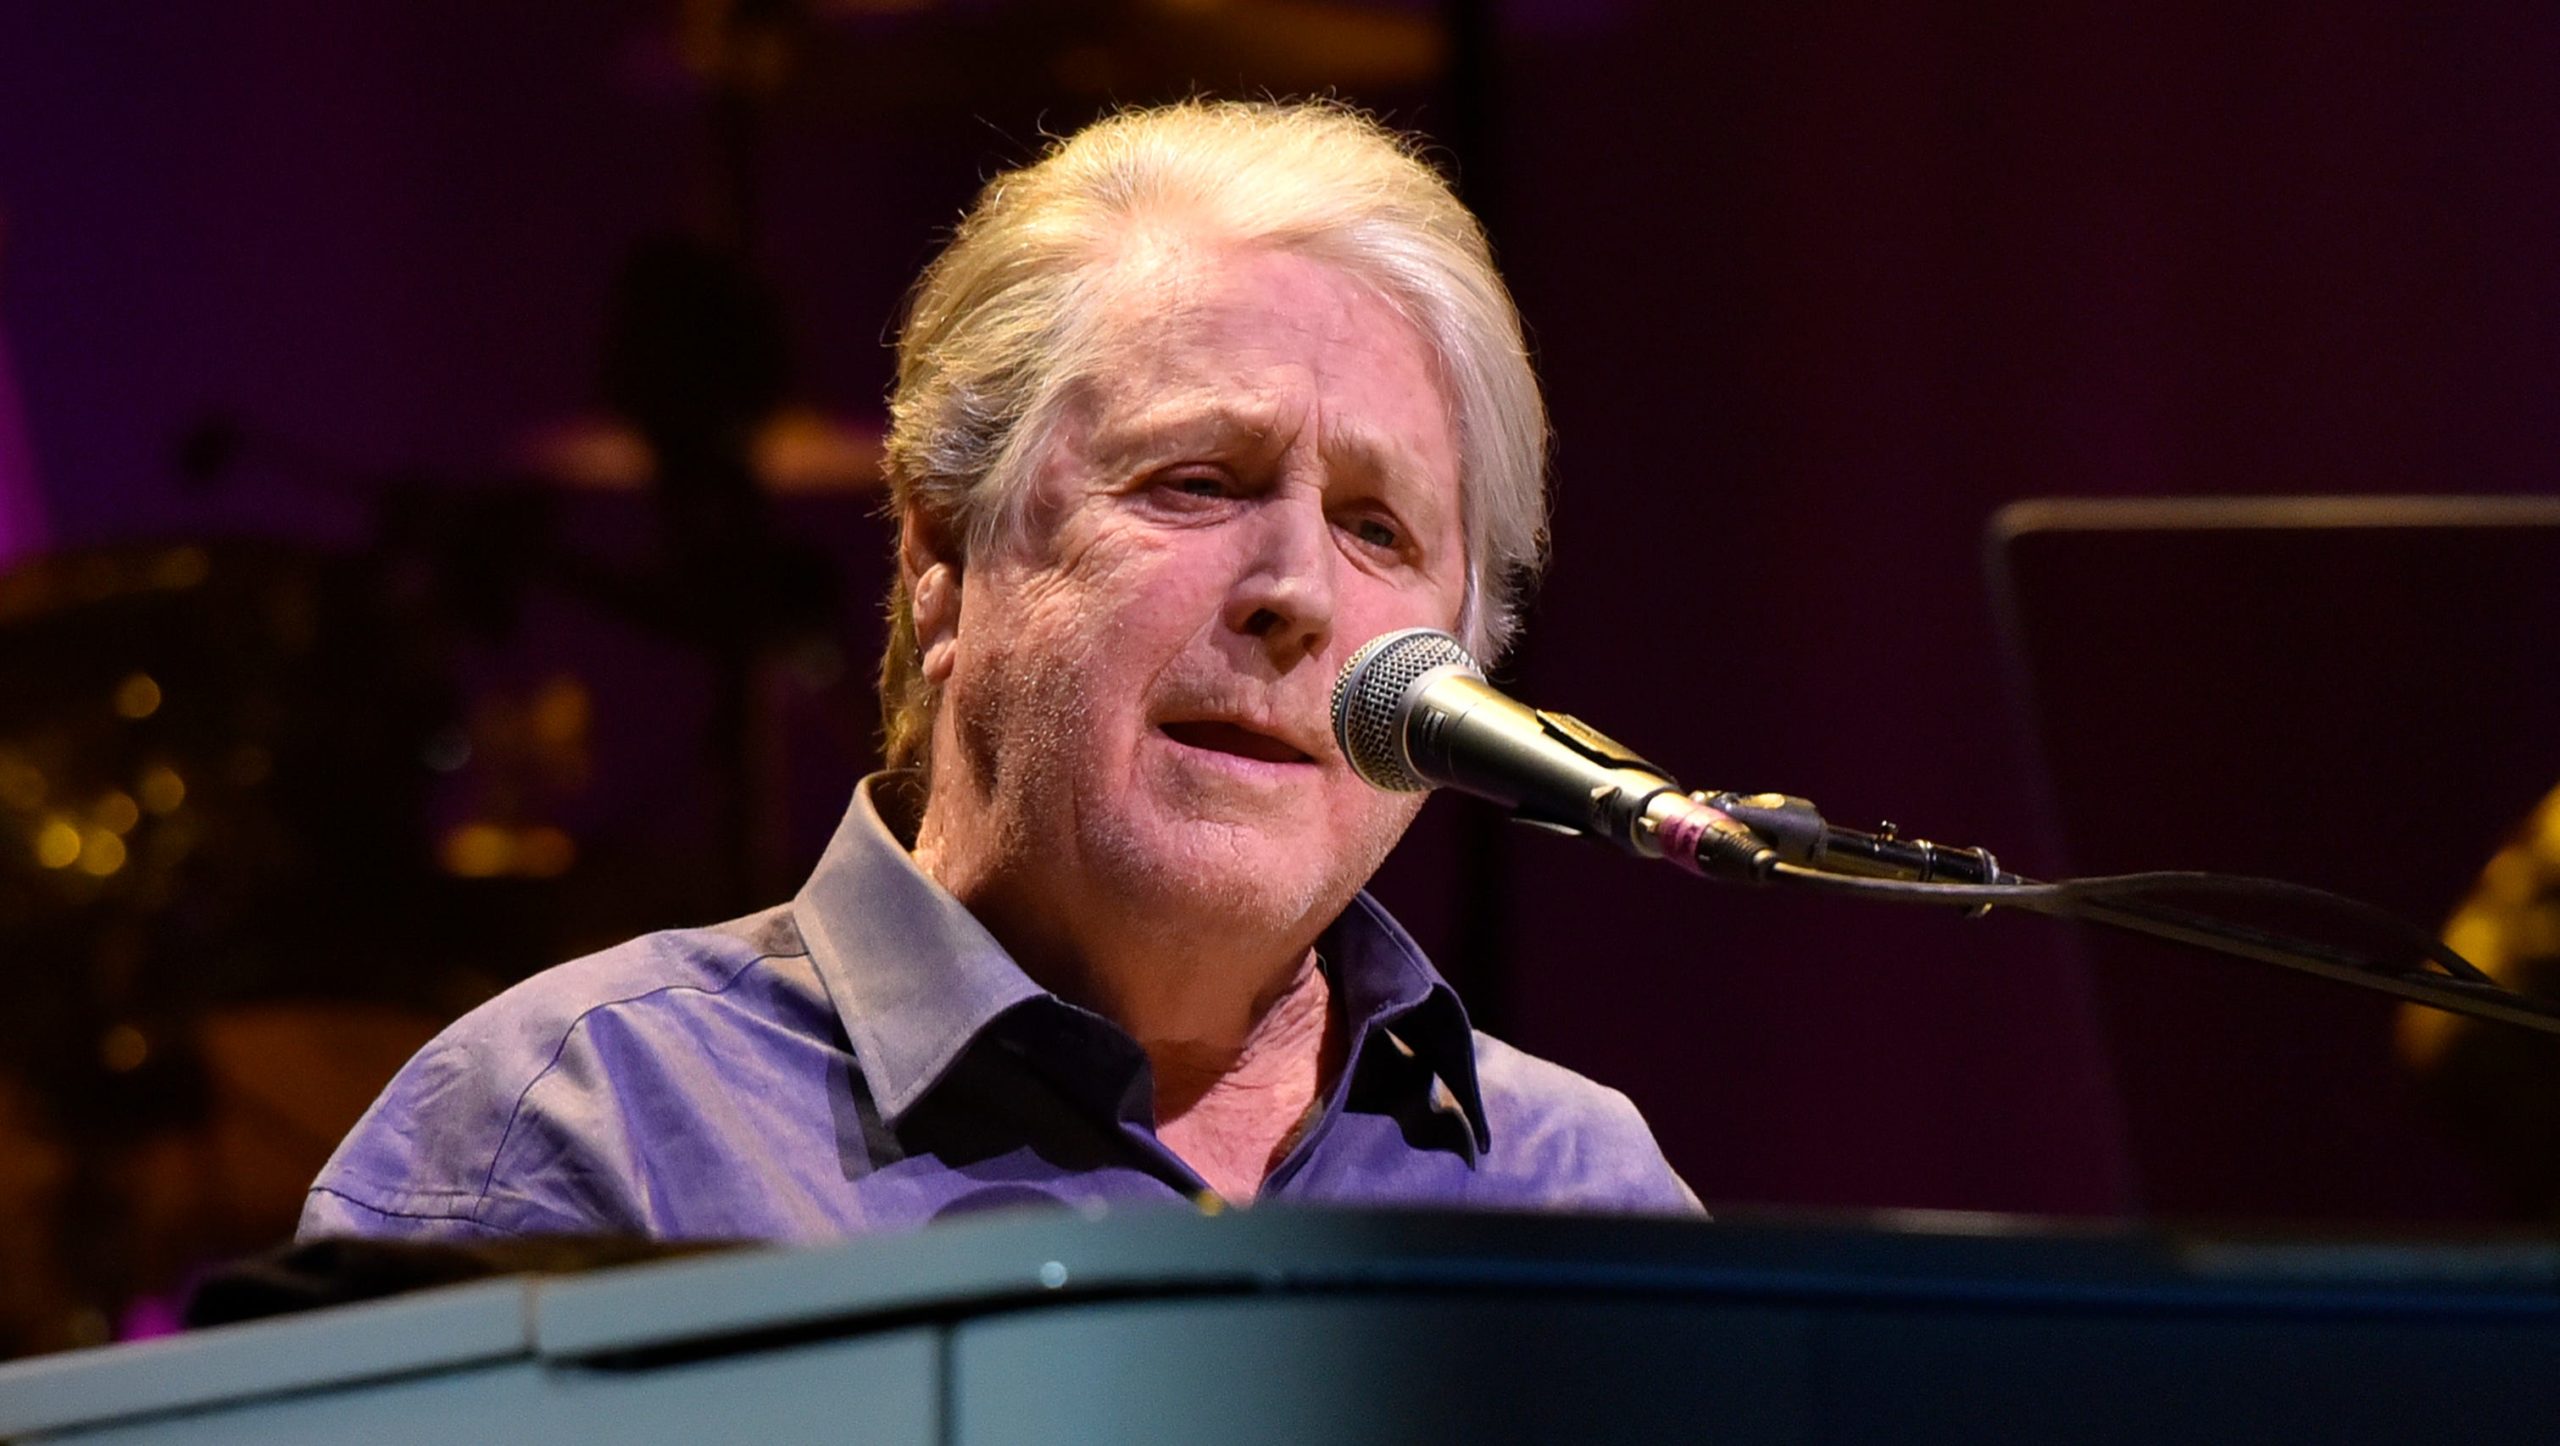 Beach Boys’ Brian Wilson performs with daughters, granddaughter for the first time: ‘Pure magic’